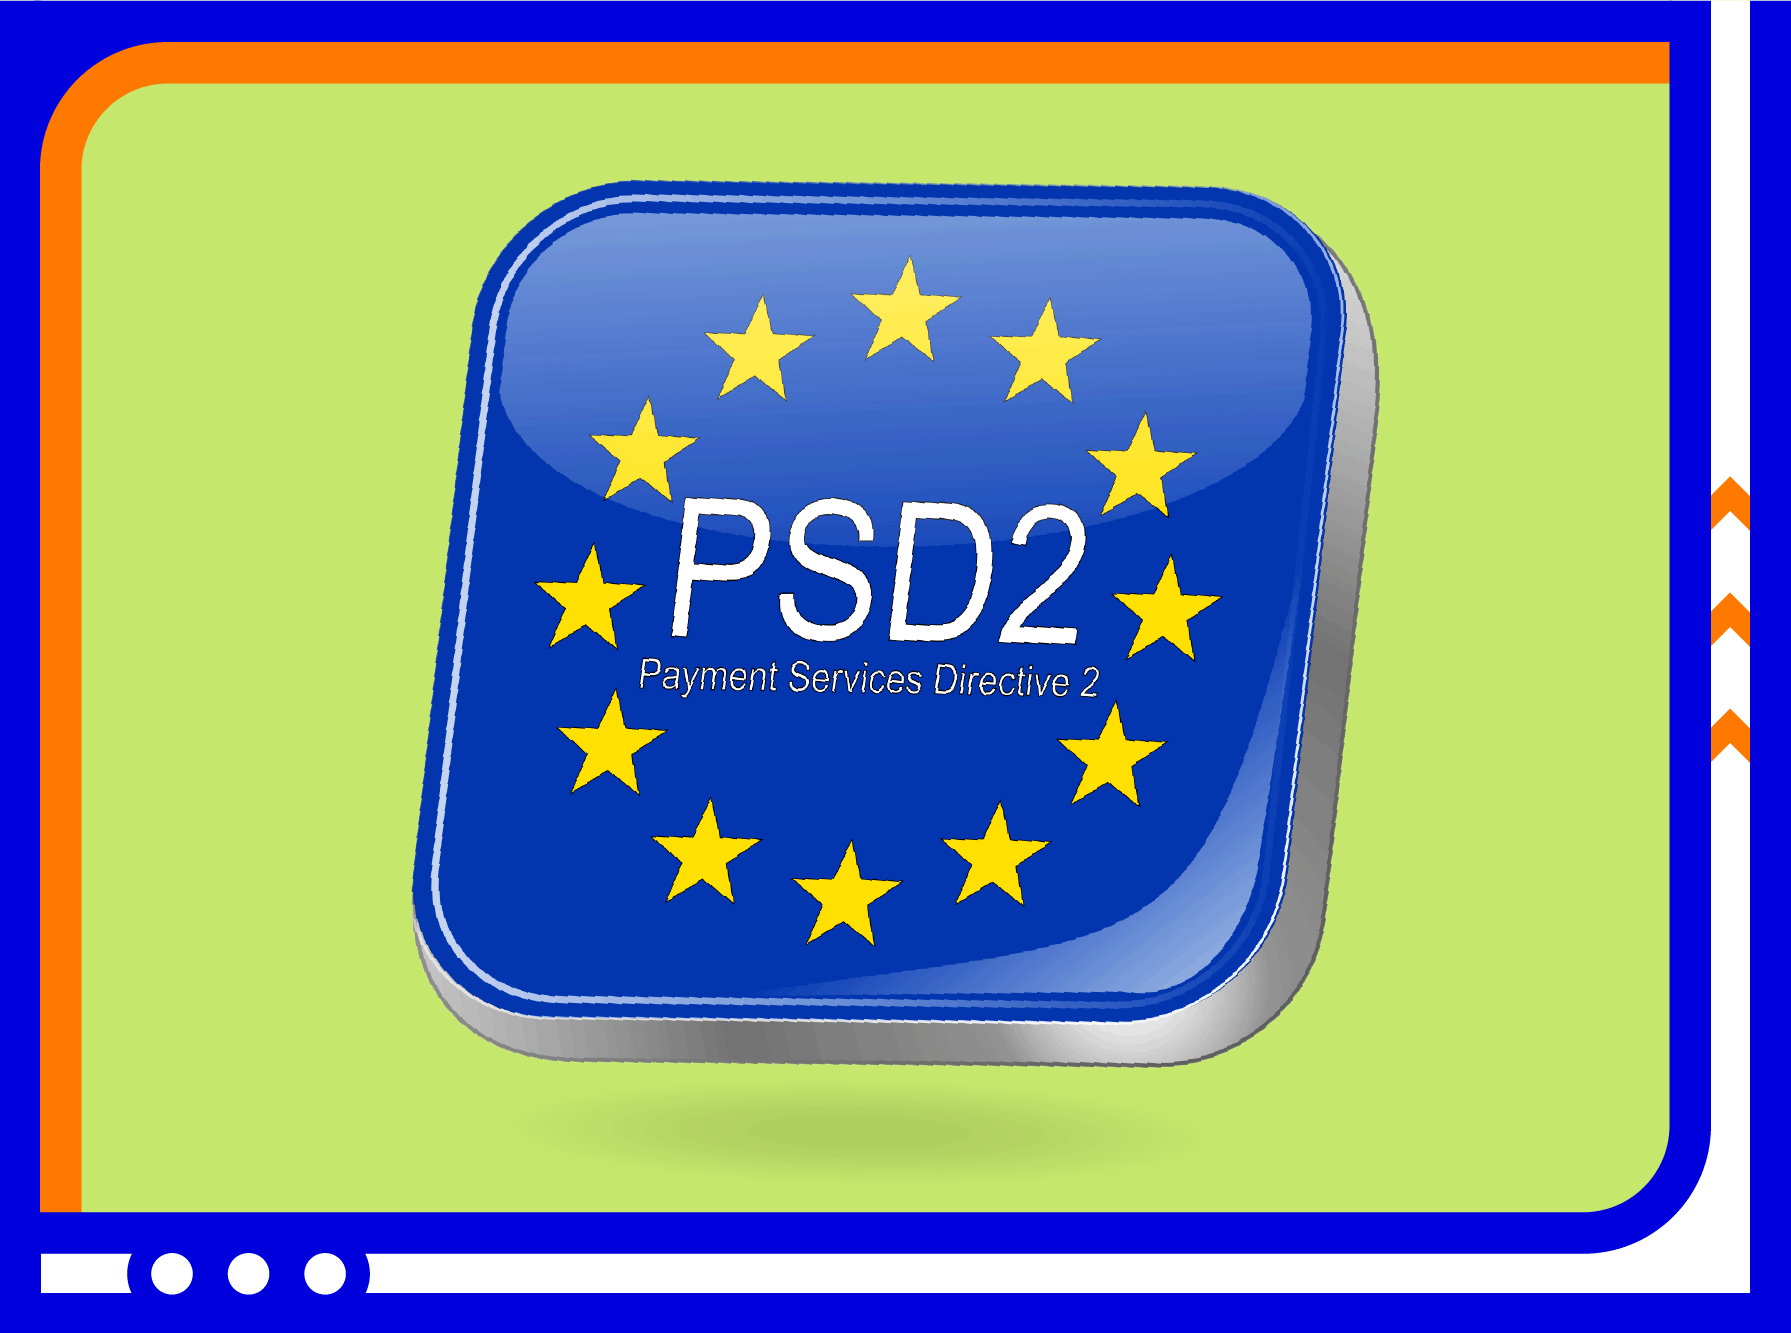 PSD2 regulation: What are the changes